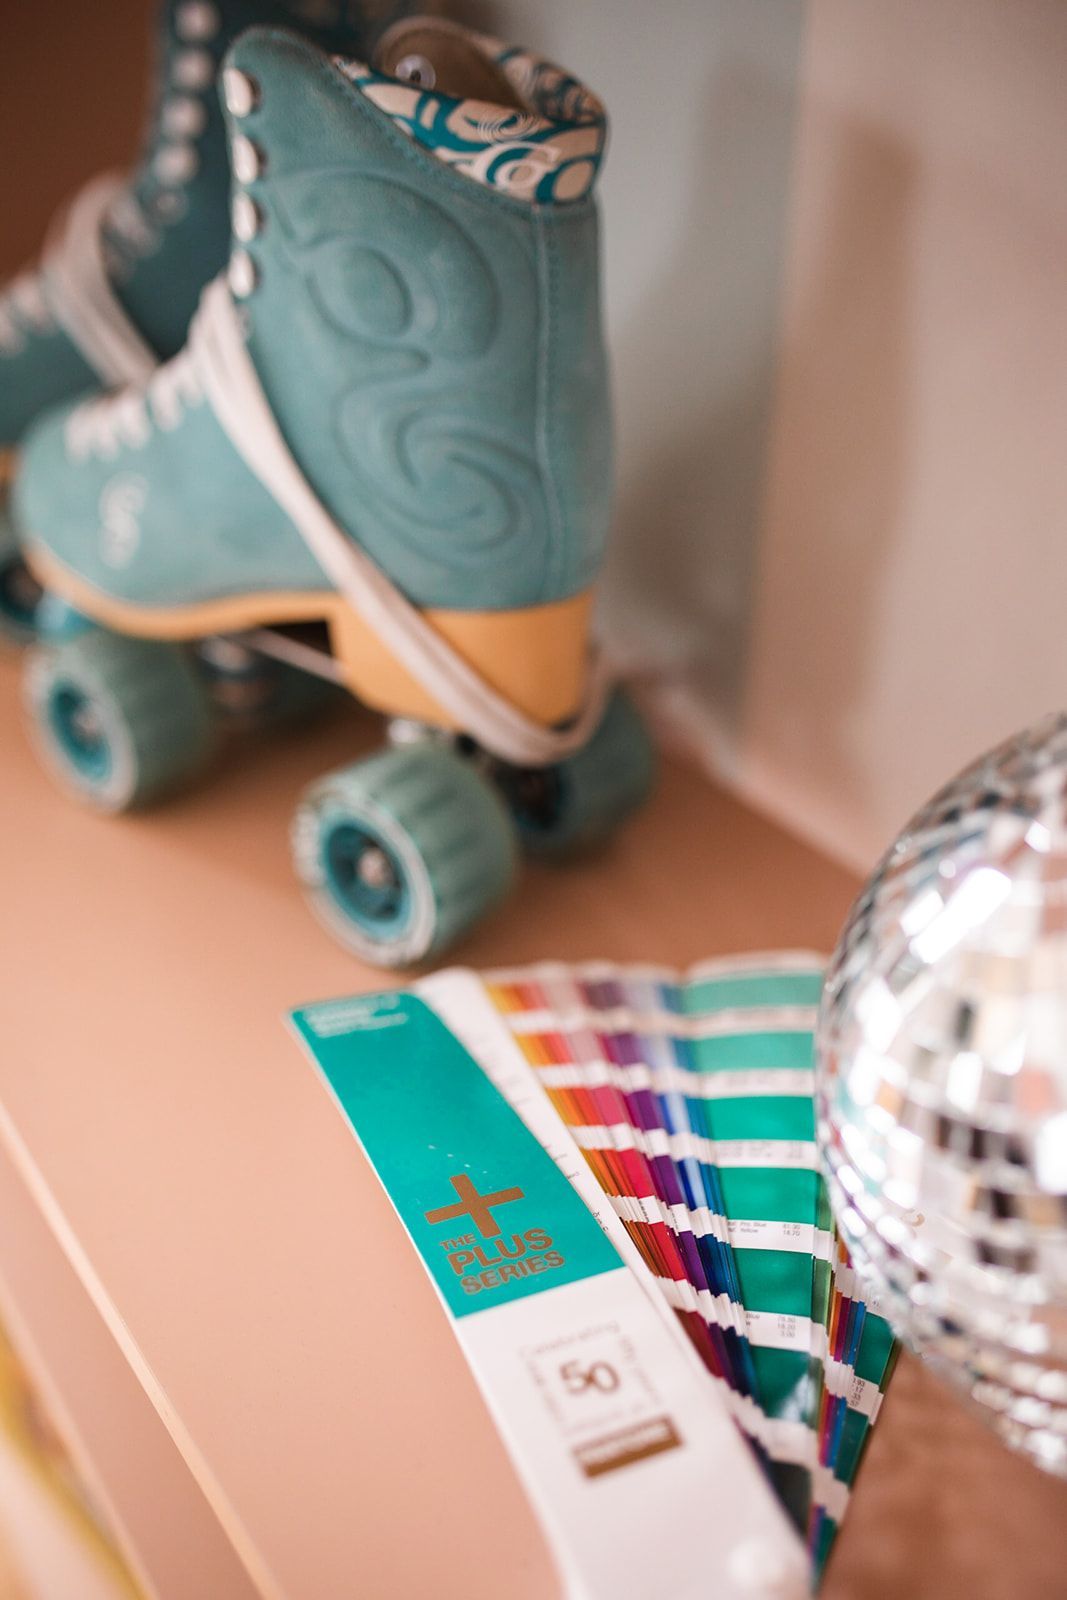 A pair of roller skates sitting on a shelf next to a disco ball